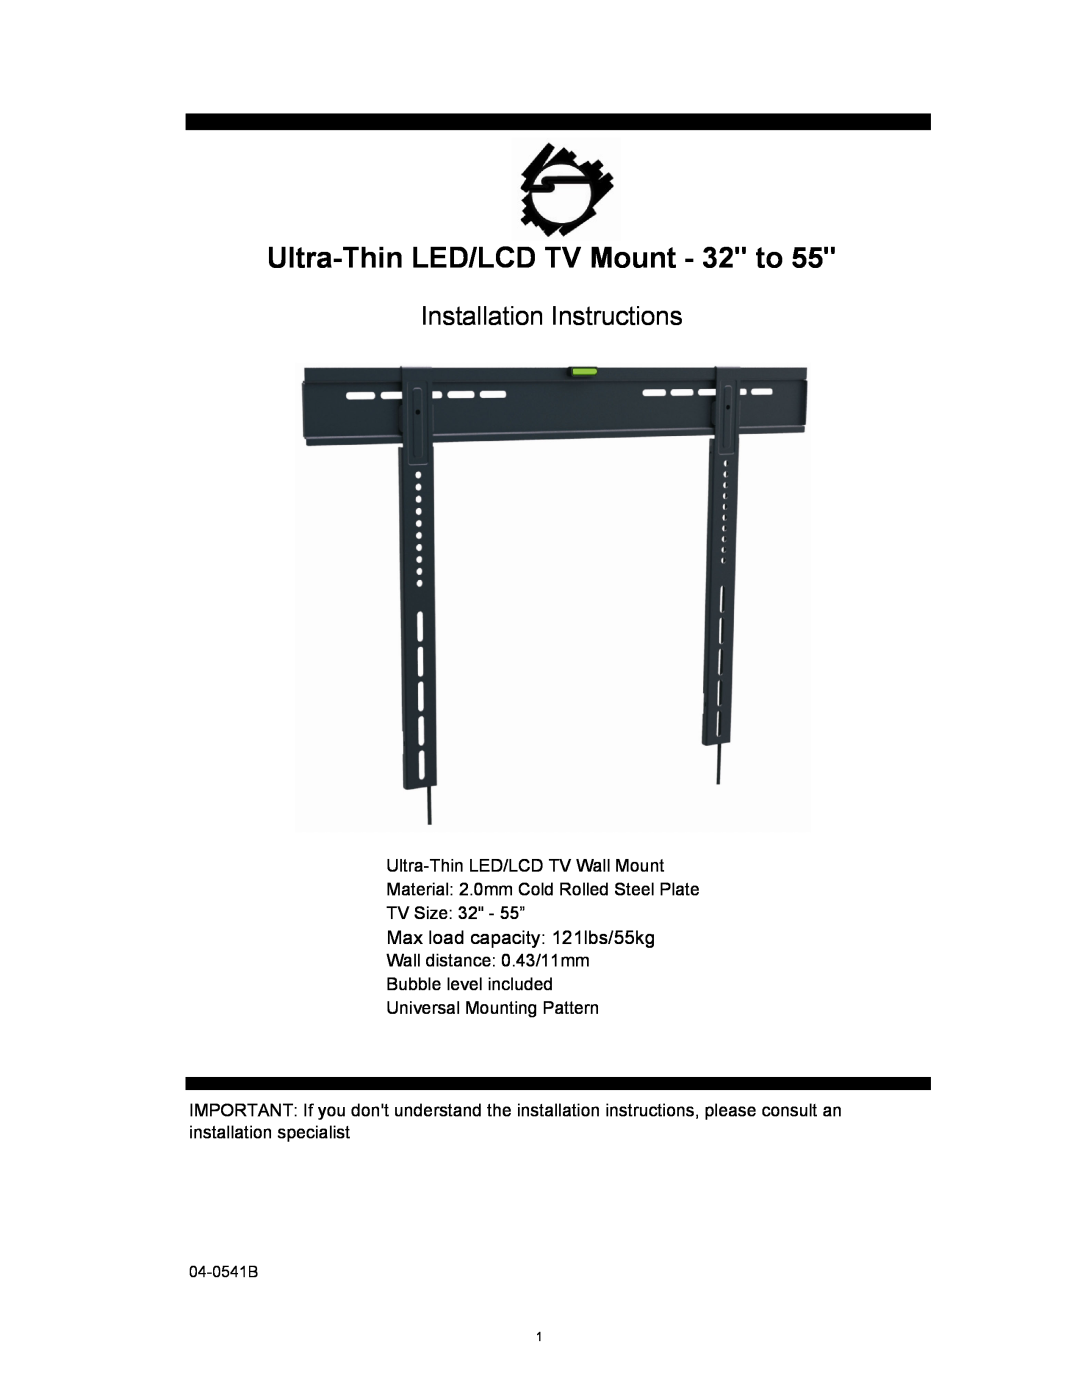 SIIG L733, L704, L732, L734 installation instructions Max load capacity 121lbs/55kg, Ultra-Thin LED/LCD TV Mount - 32 to 